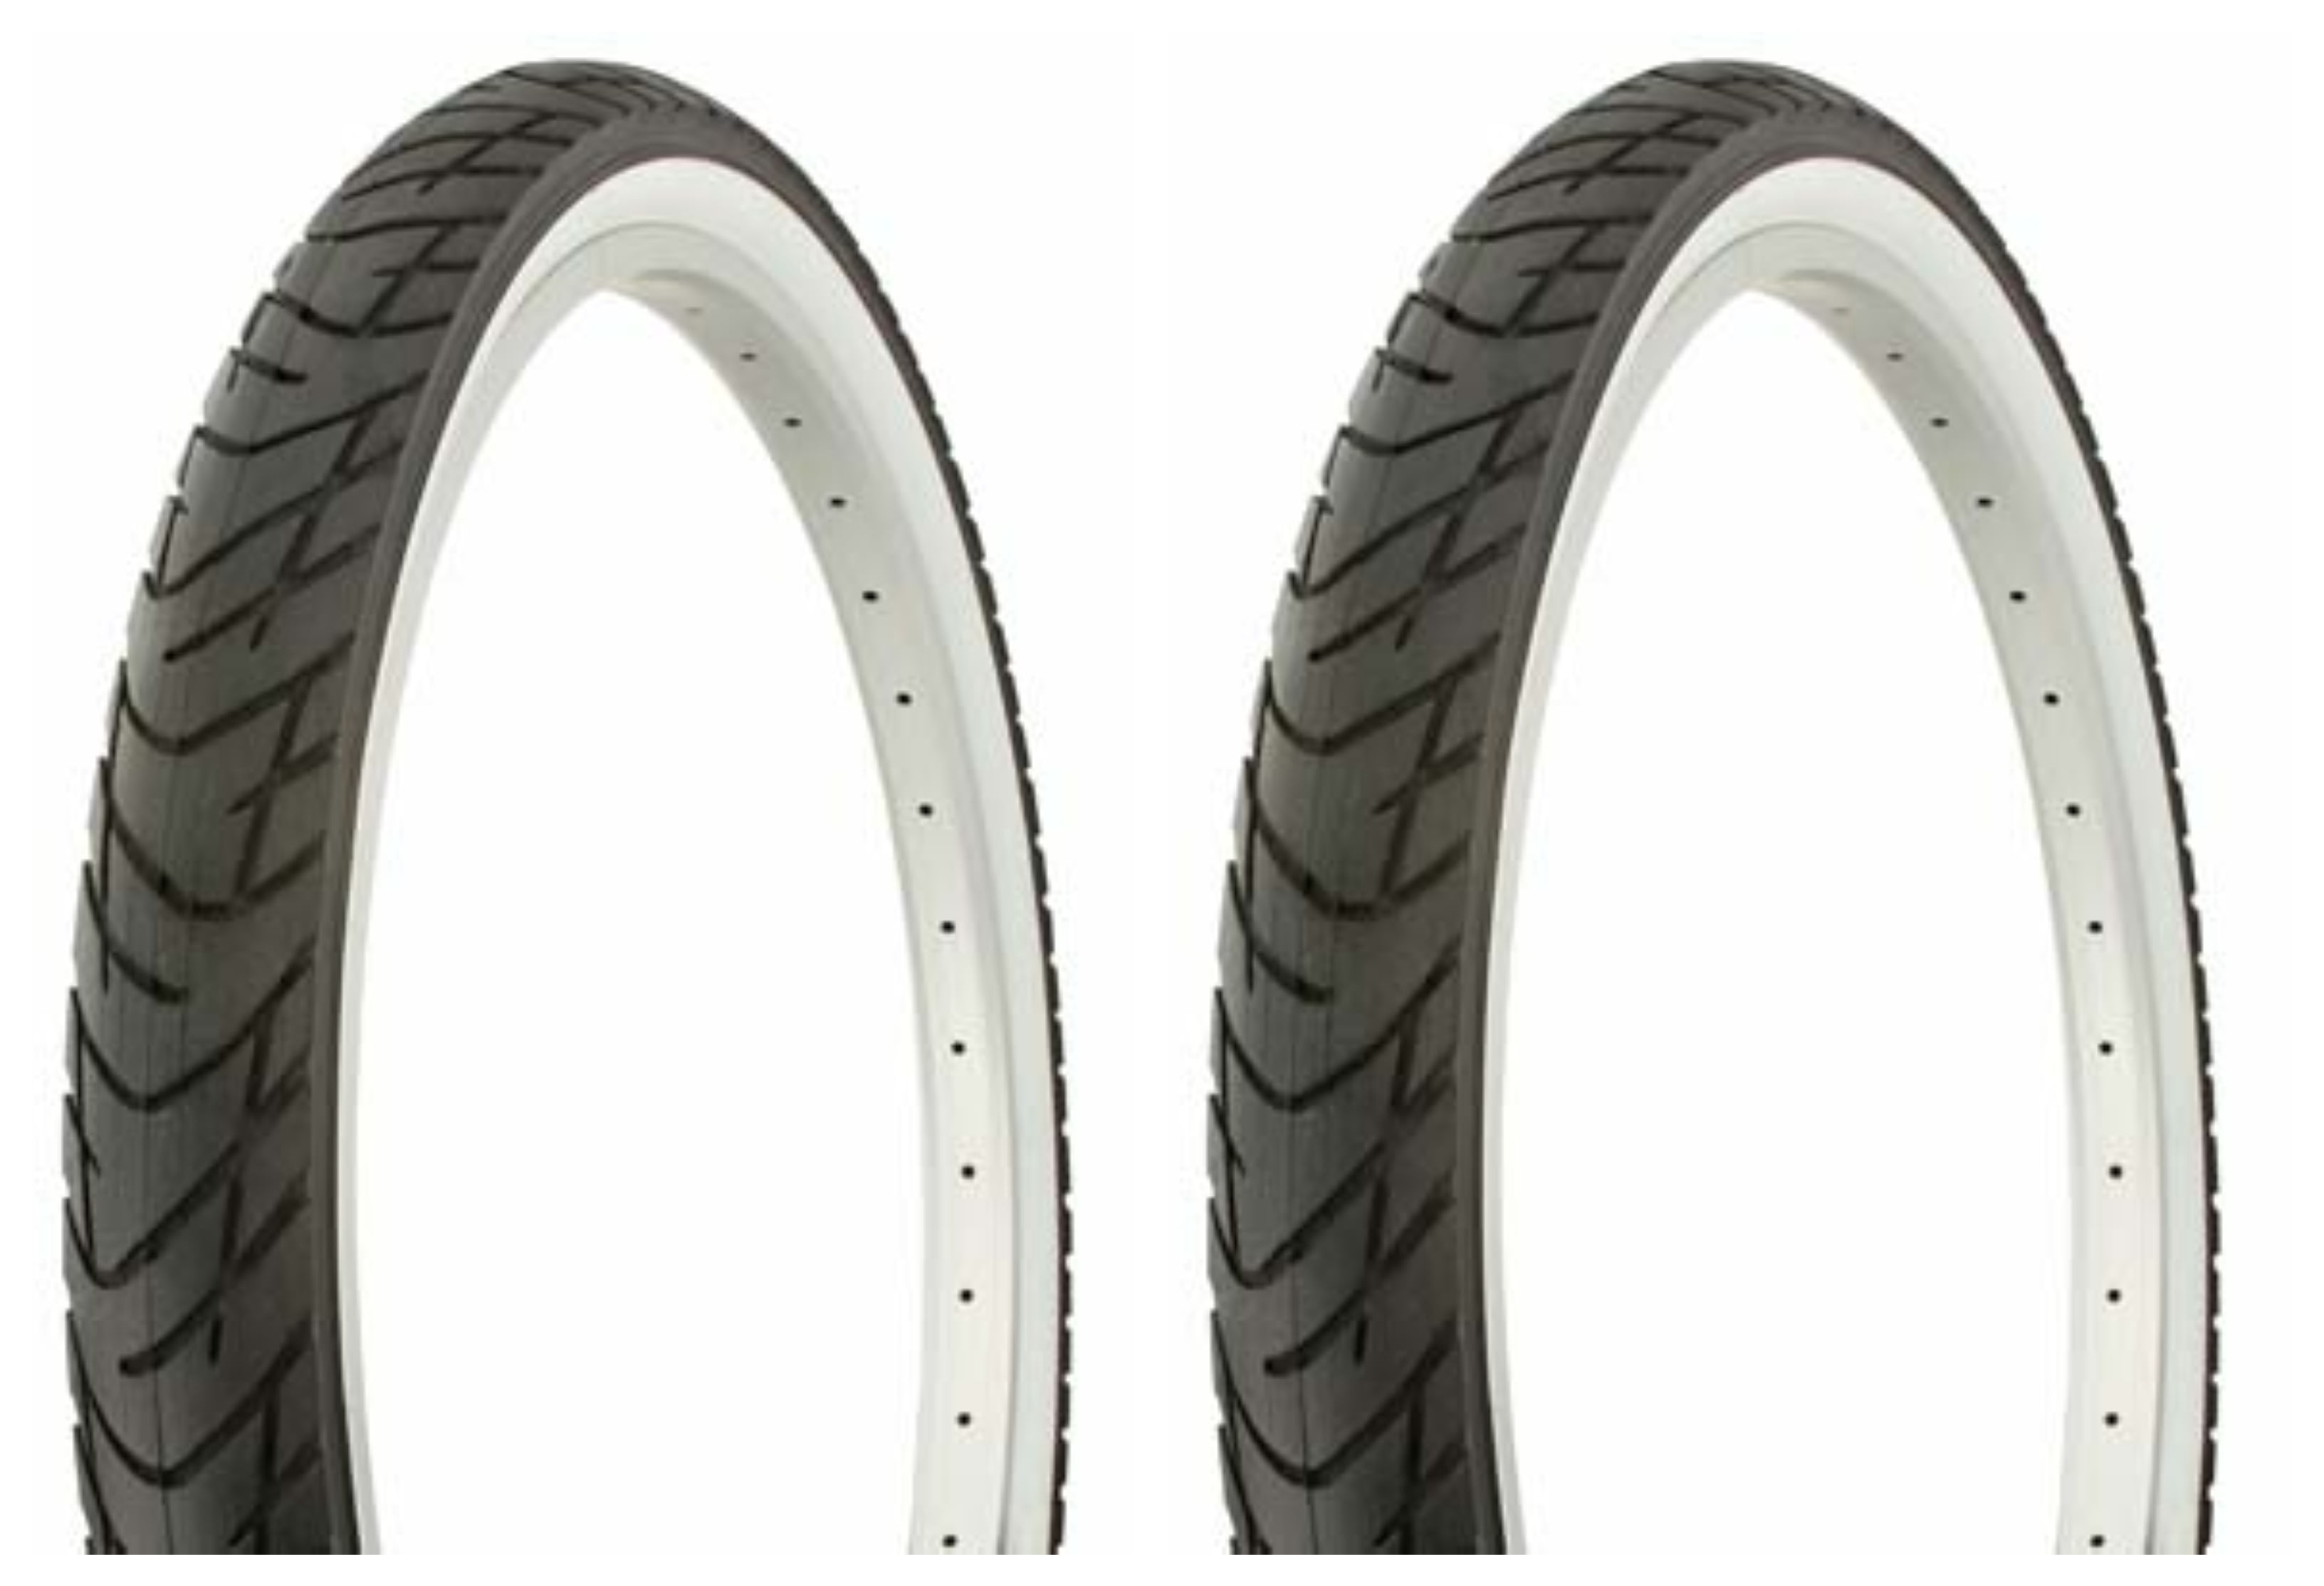 Whitewall Bicycle Tires Balloon 26 inch x 2 .125 wide Fat Tire Brick tread 